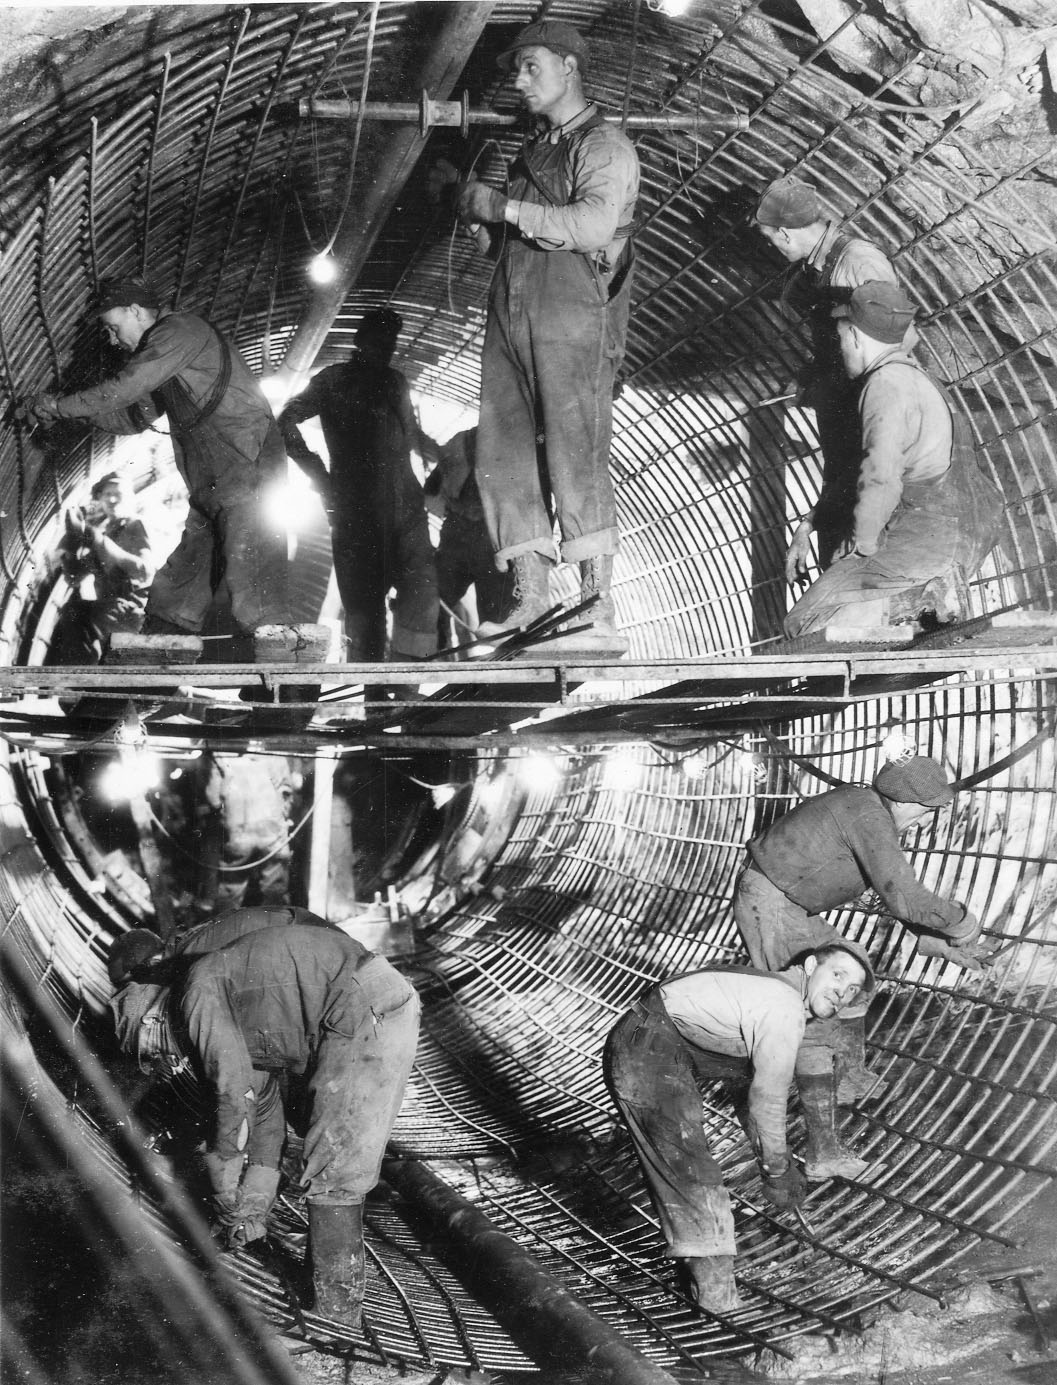 Workers build the Moffat Tunnel in the 1920s.